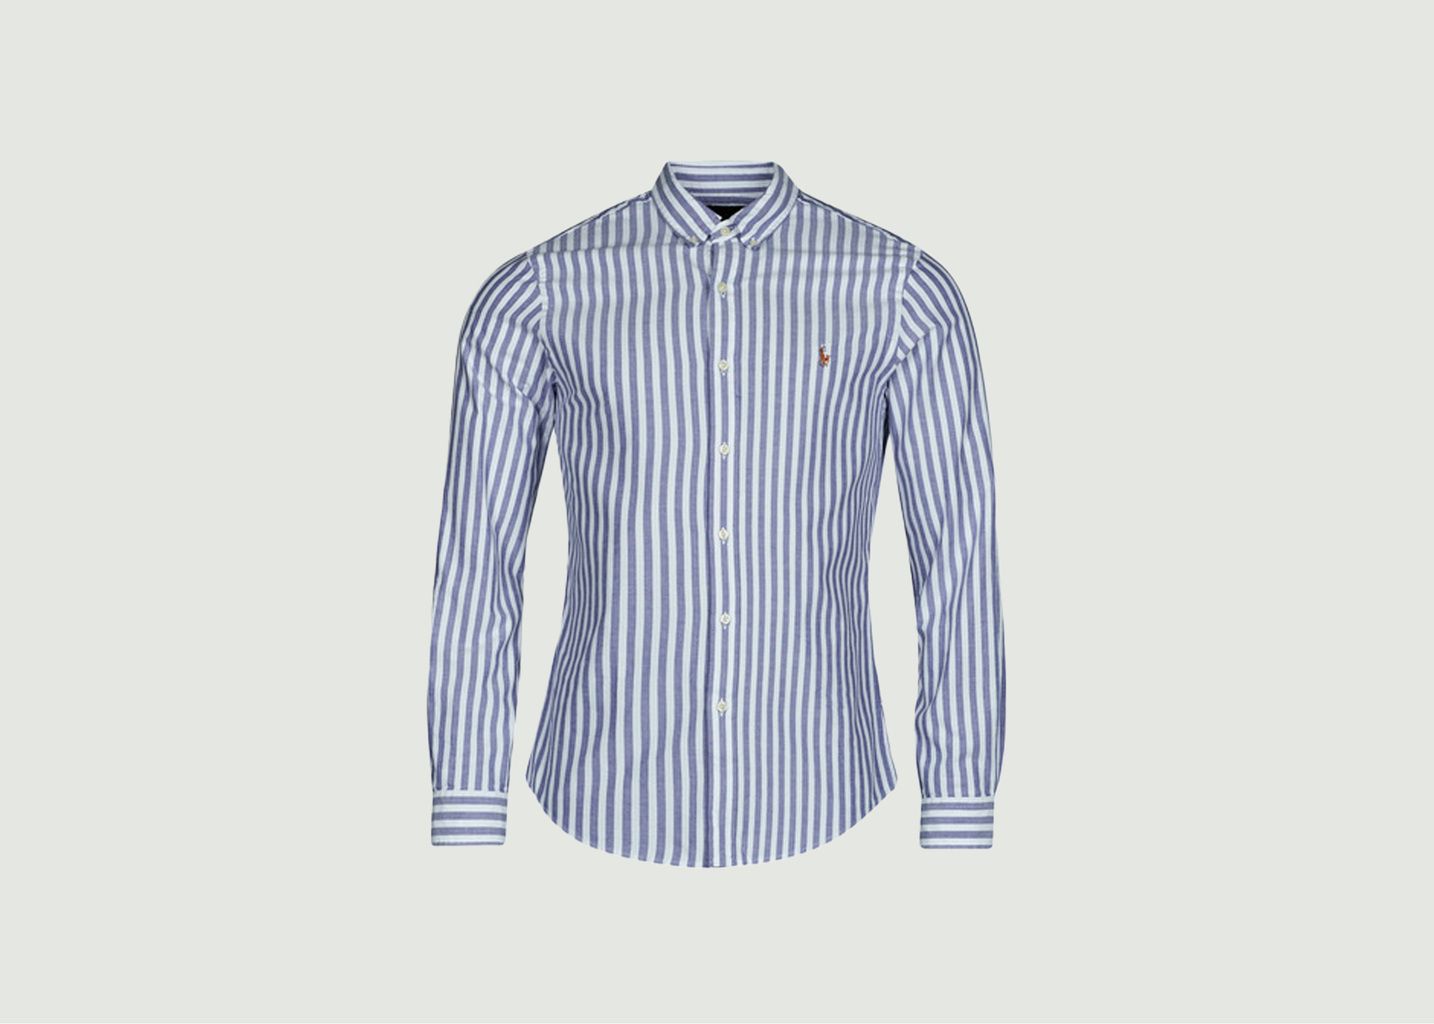 Stretch Oxford shirt with stripes - Polo Ralph Lauren